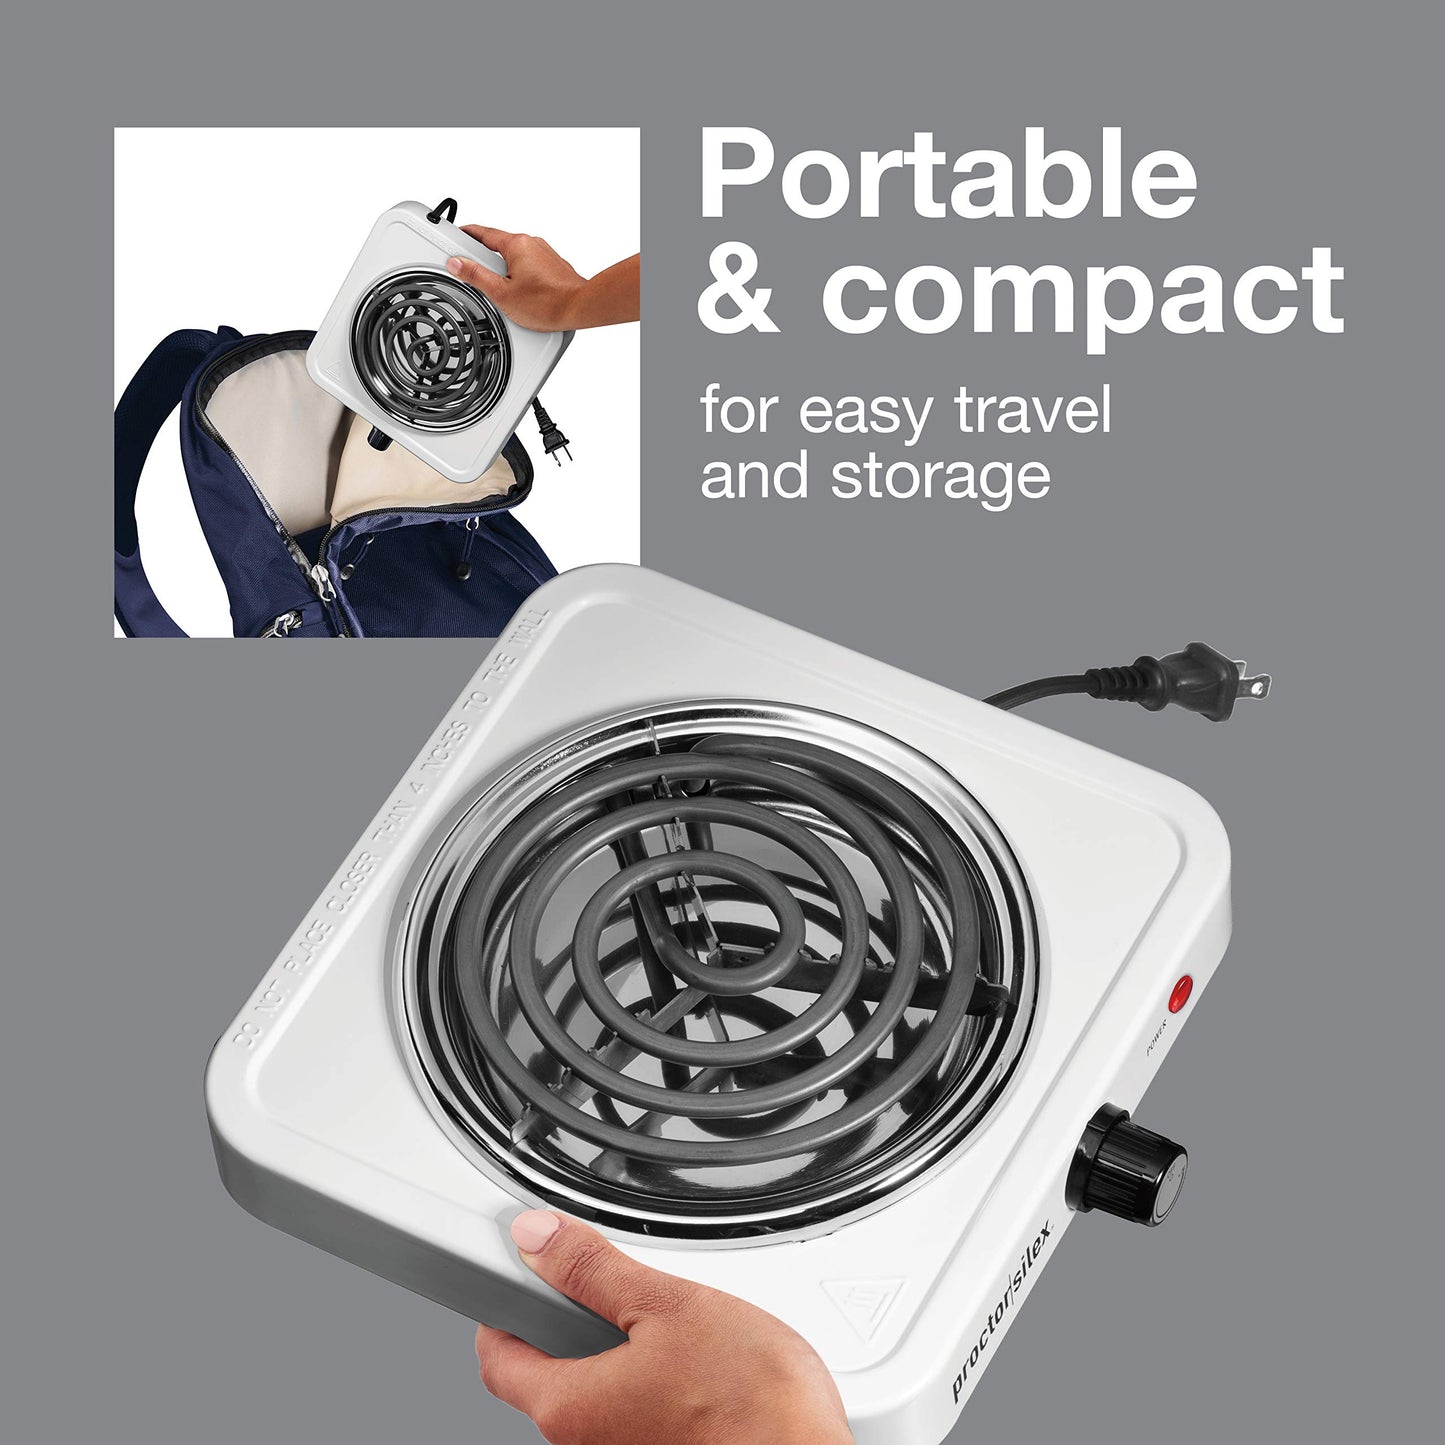 Proctor Silex Electric Stove, Single Burner Cooktop, Compact and Portable, Adjustable Temperature Hot Plate